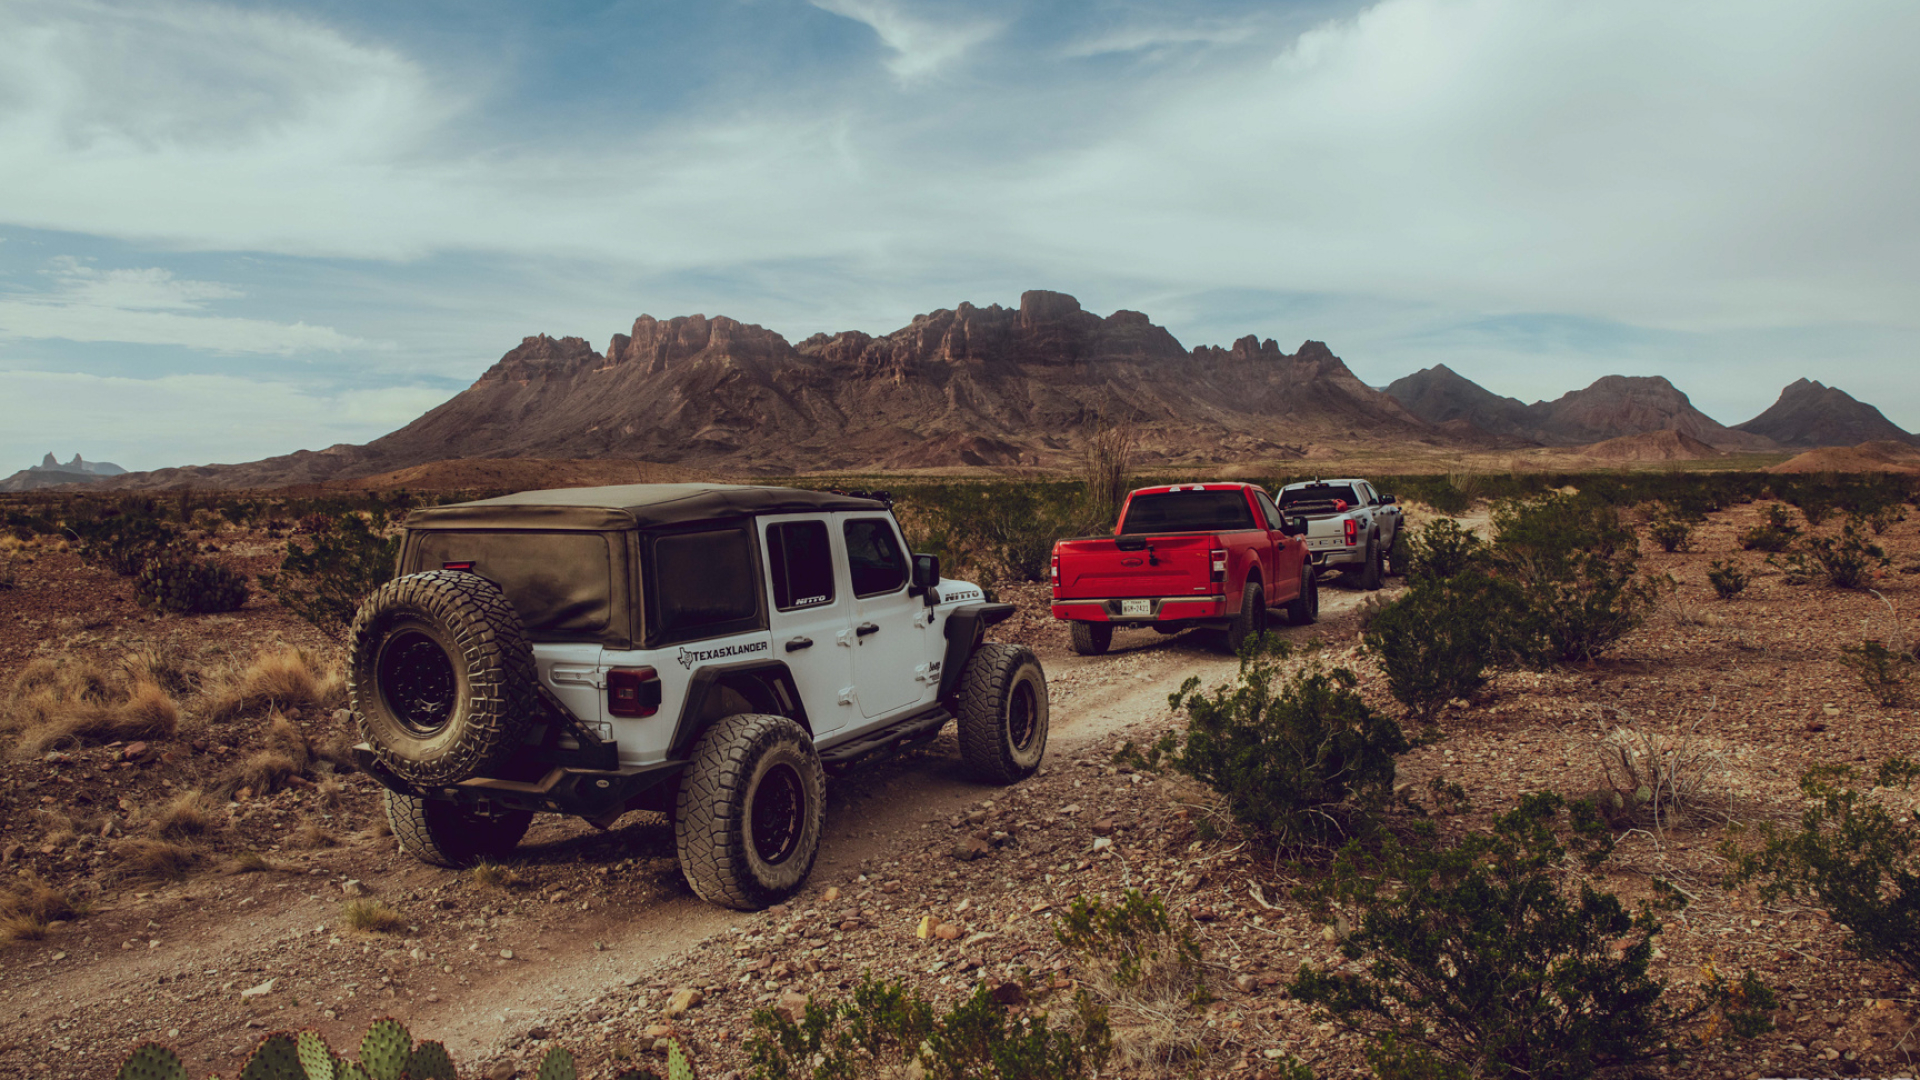 Off-road Driving: Exploring Texas, Off-road on Big Bend National Park's River Road, Travelling over difficult terrain. 1920x1080 Full HD Wallpaper.